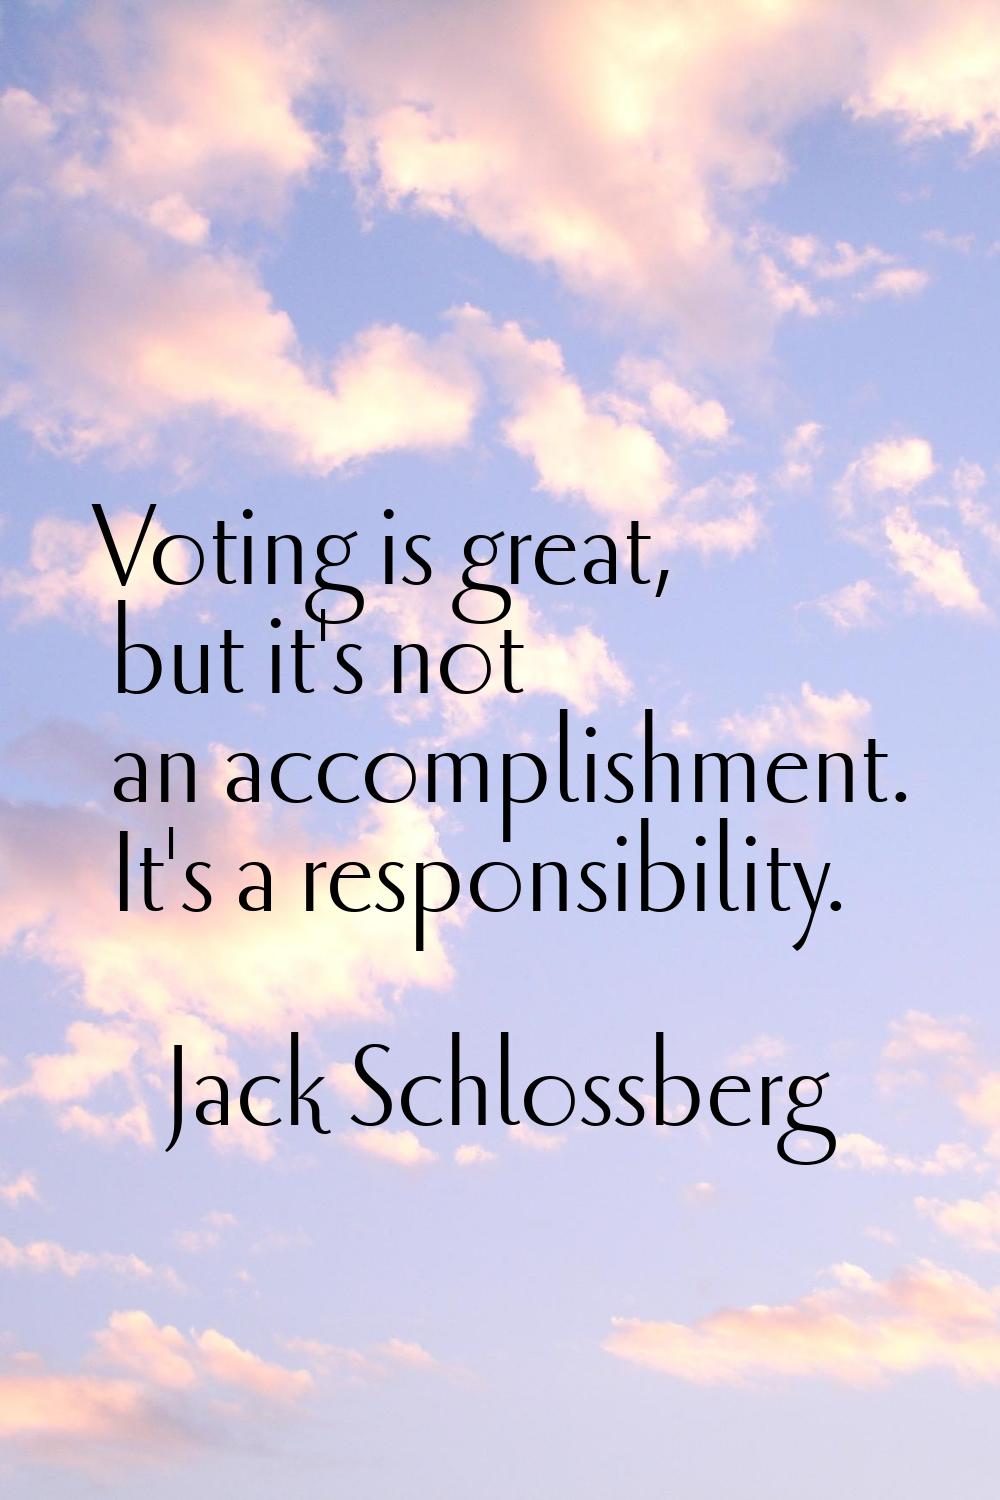 Voting is great, but it's not an accomplishment. It's a responsibility.